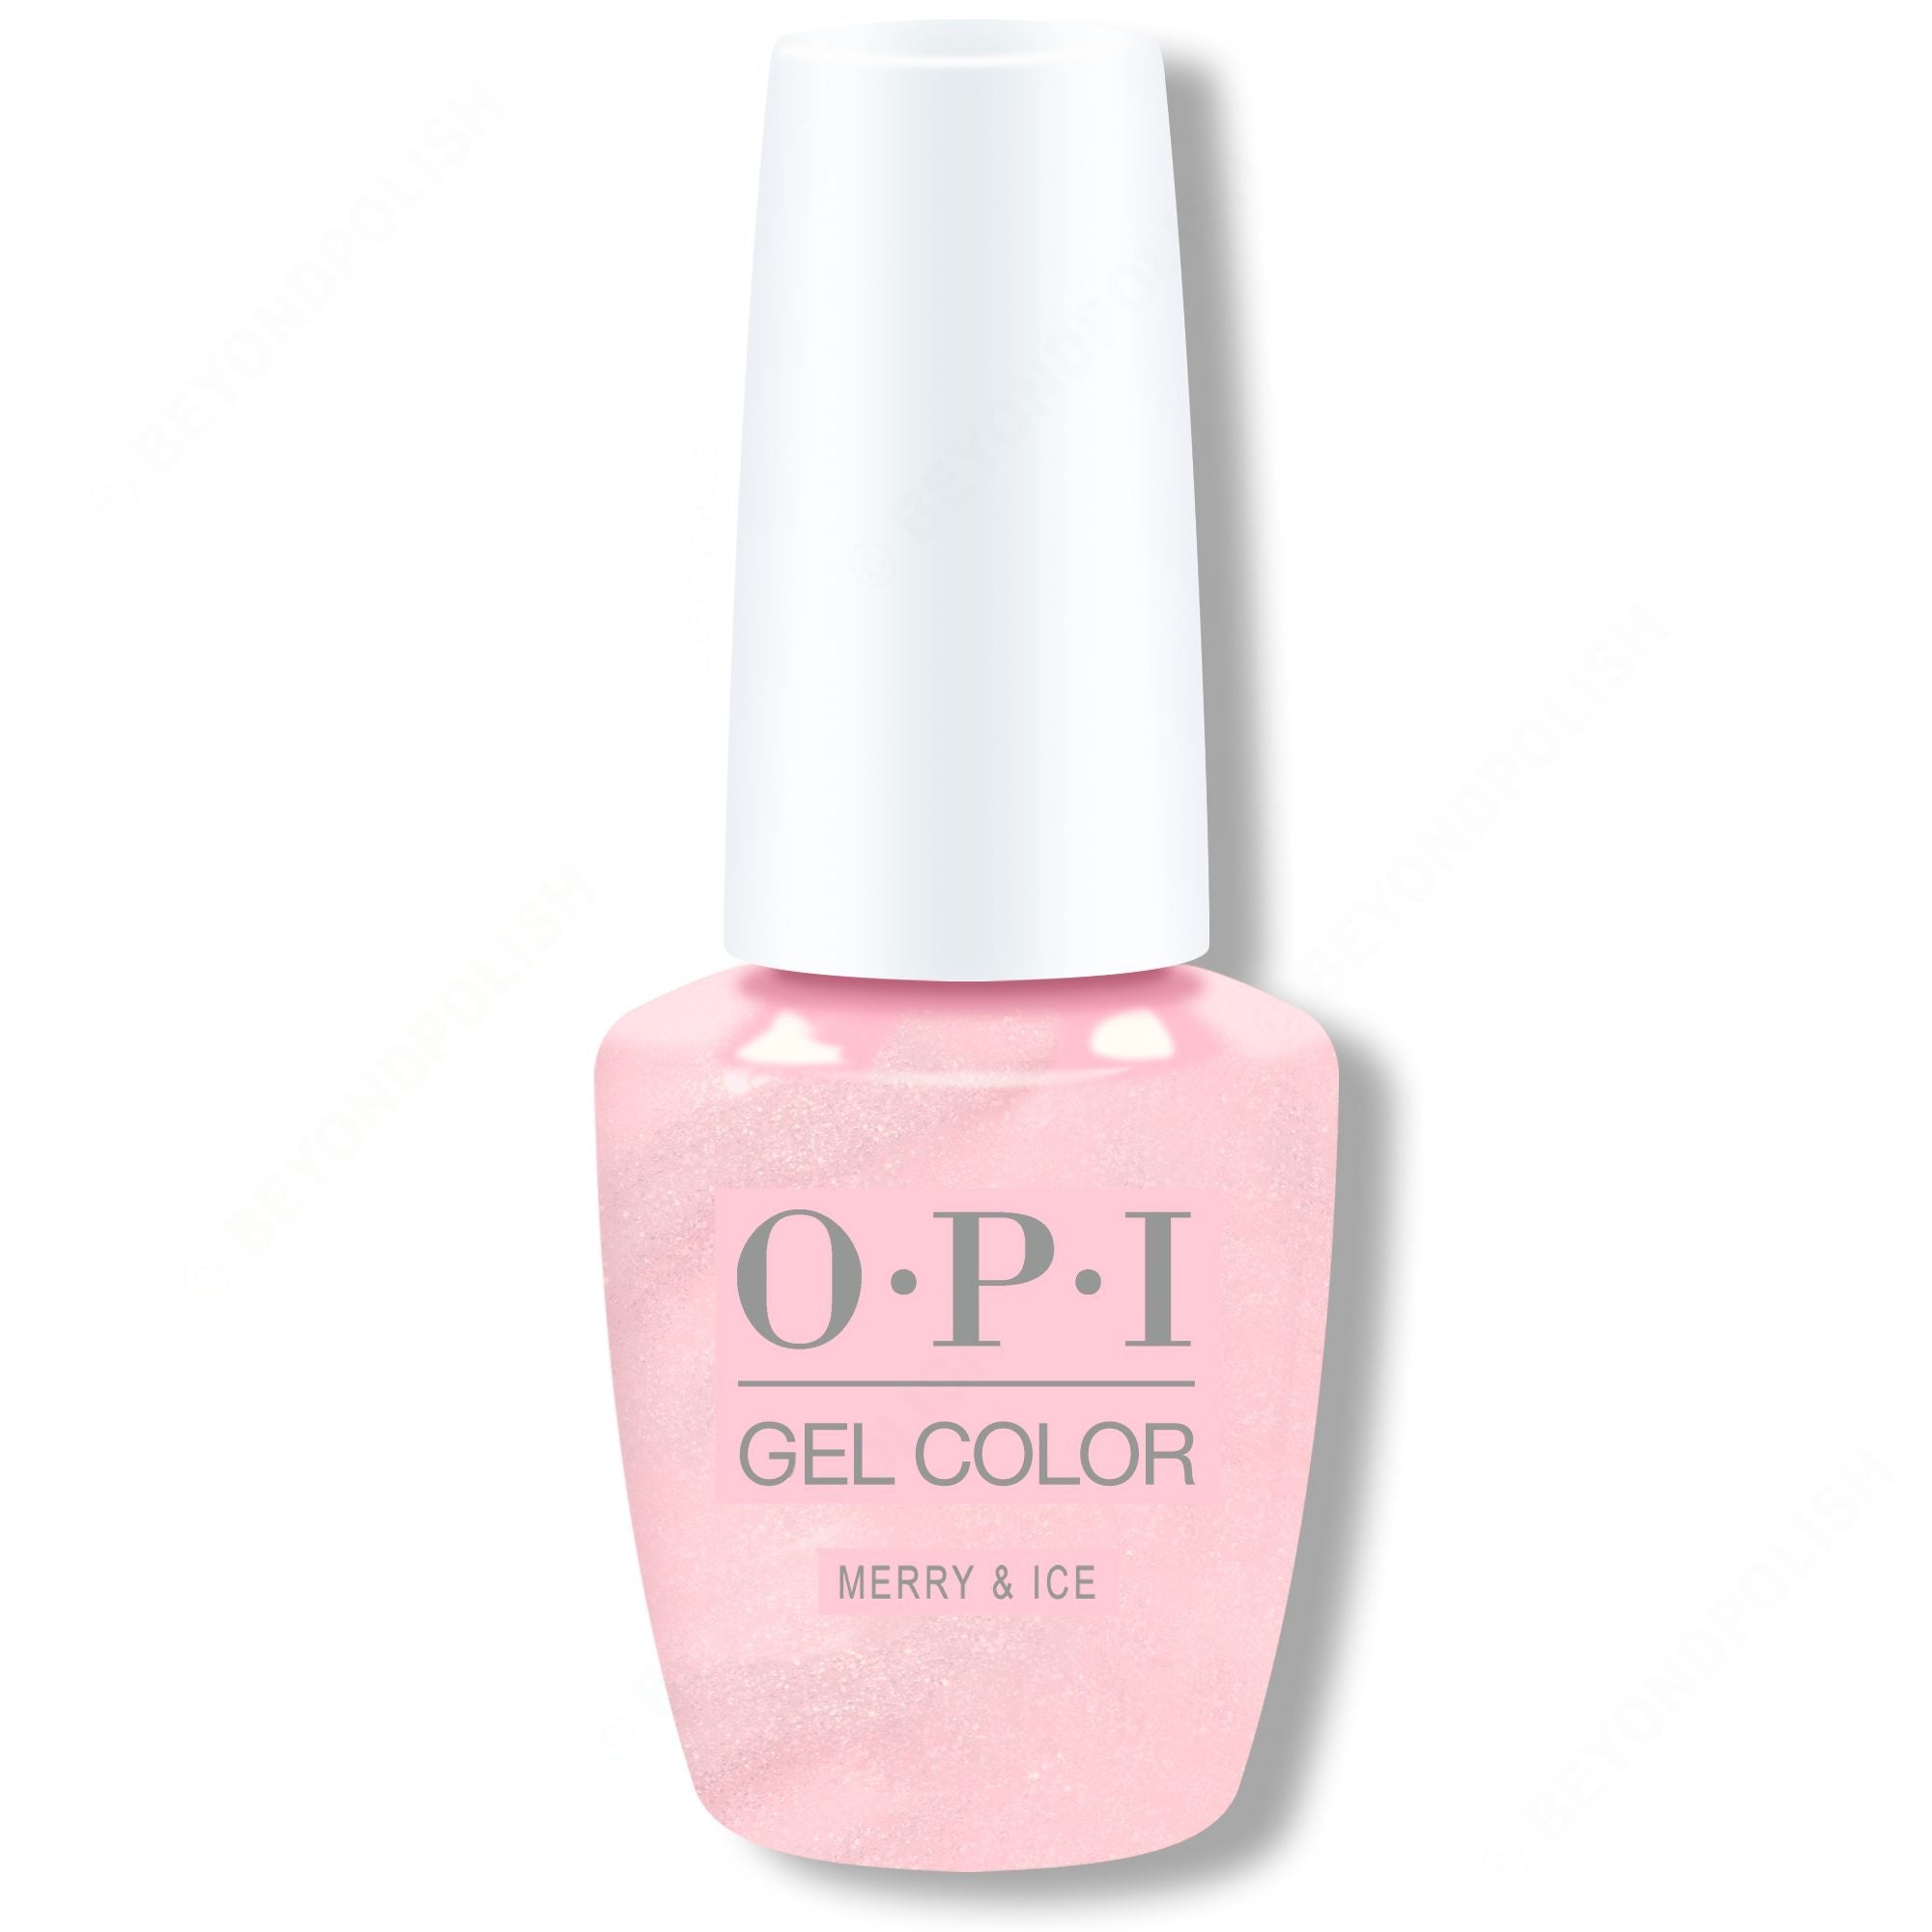 OPI Gel Color - Merry & Ice 0.5 oz - #HPP09